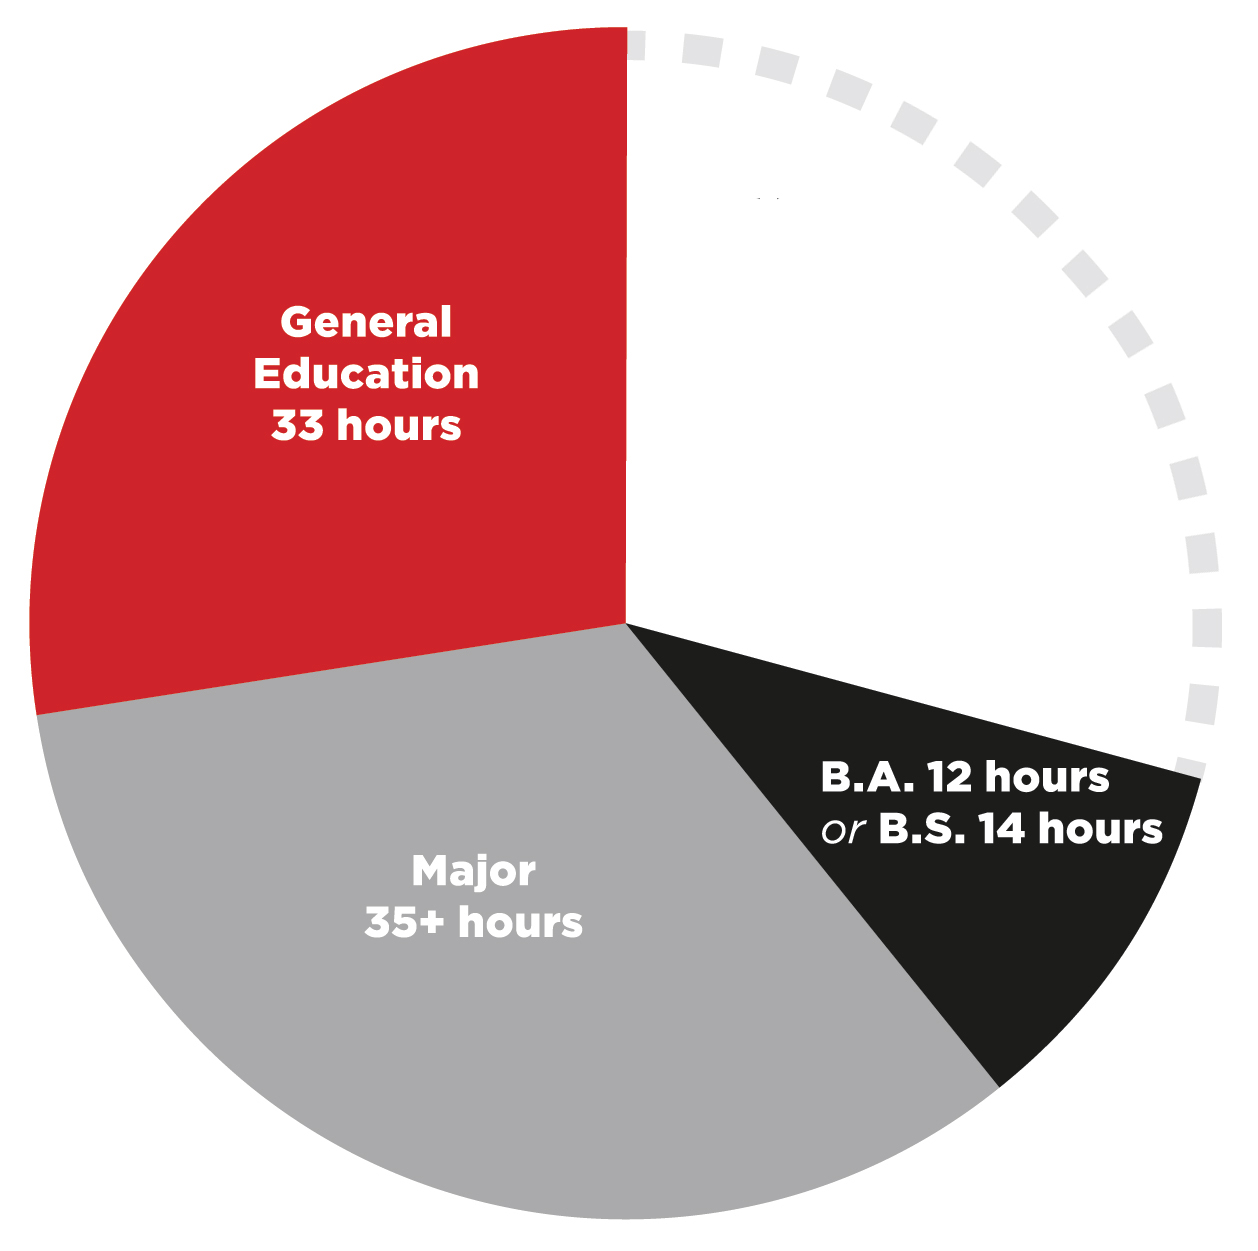 Pie chart: general education is 33 hours, major is 35 or more hours, BA is 12 hours or BS is 14 hours, the rest of the pie (40 hours) is blank.